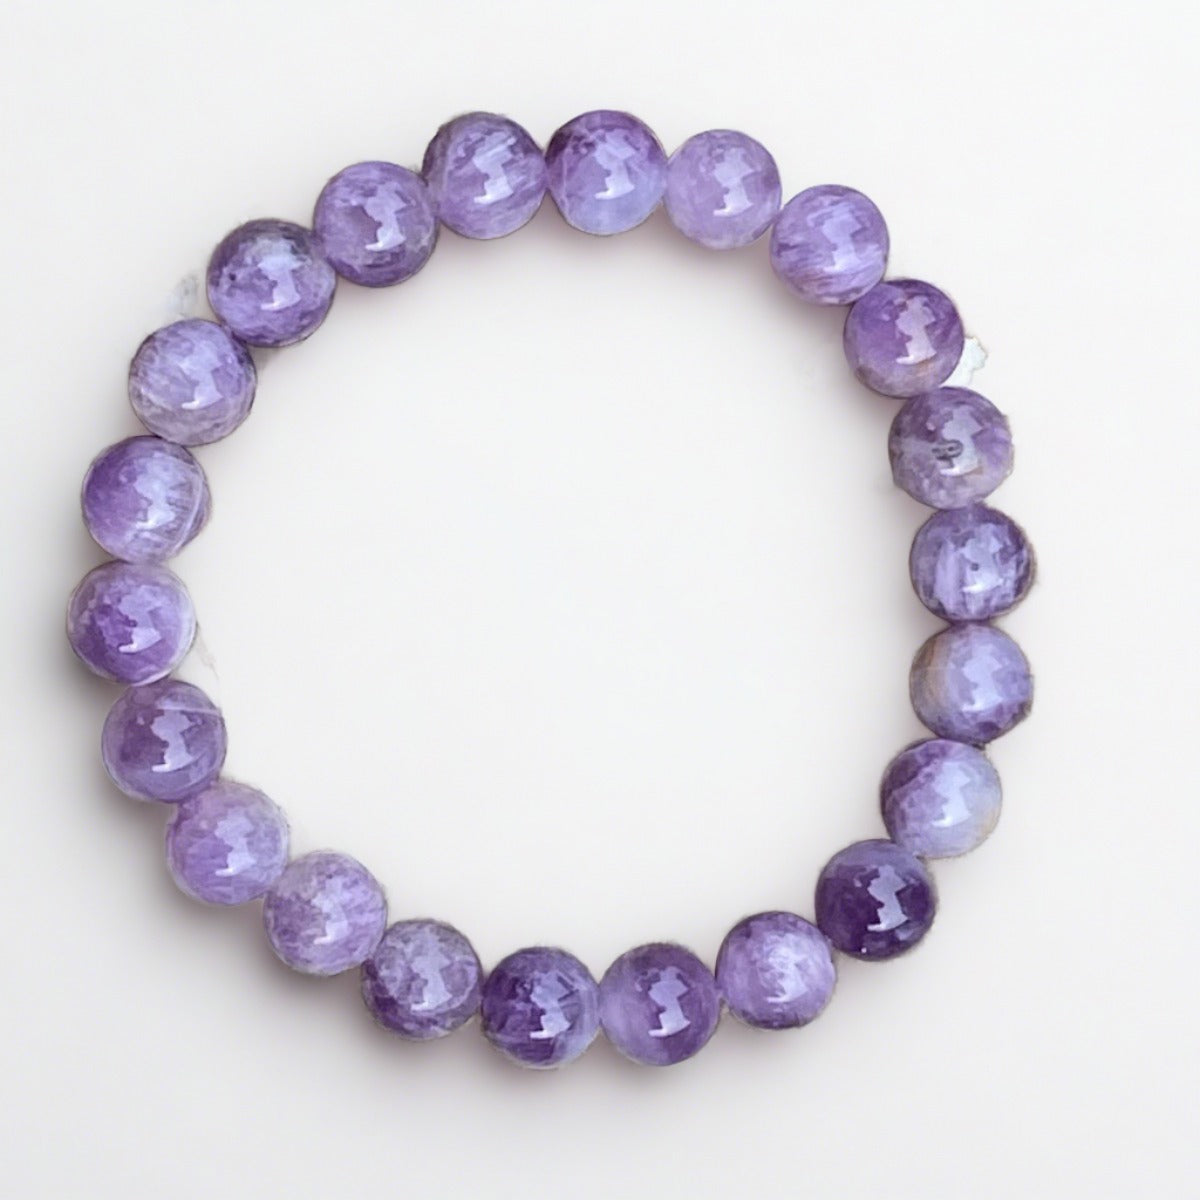 A white and brown rock featuring the Crown Chakra Dogtooth Amethyst Motivation Bracelet by Coastal Classic Creations, symbolizing mindfulness and spiritual connection